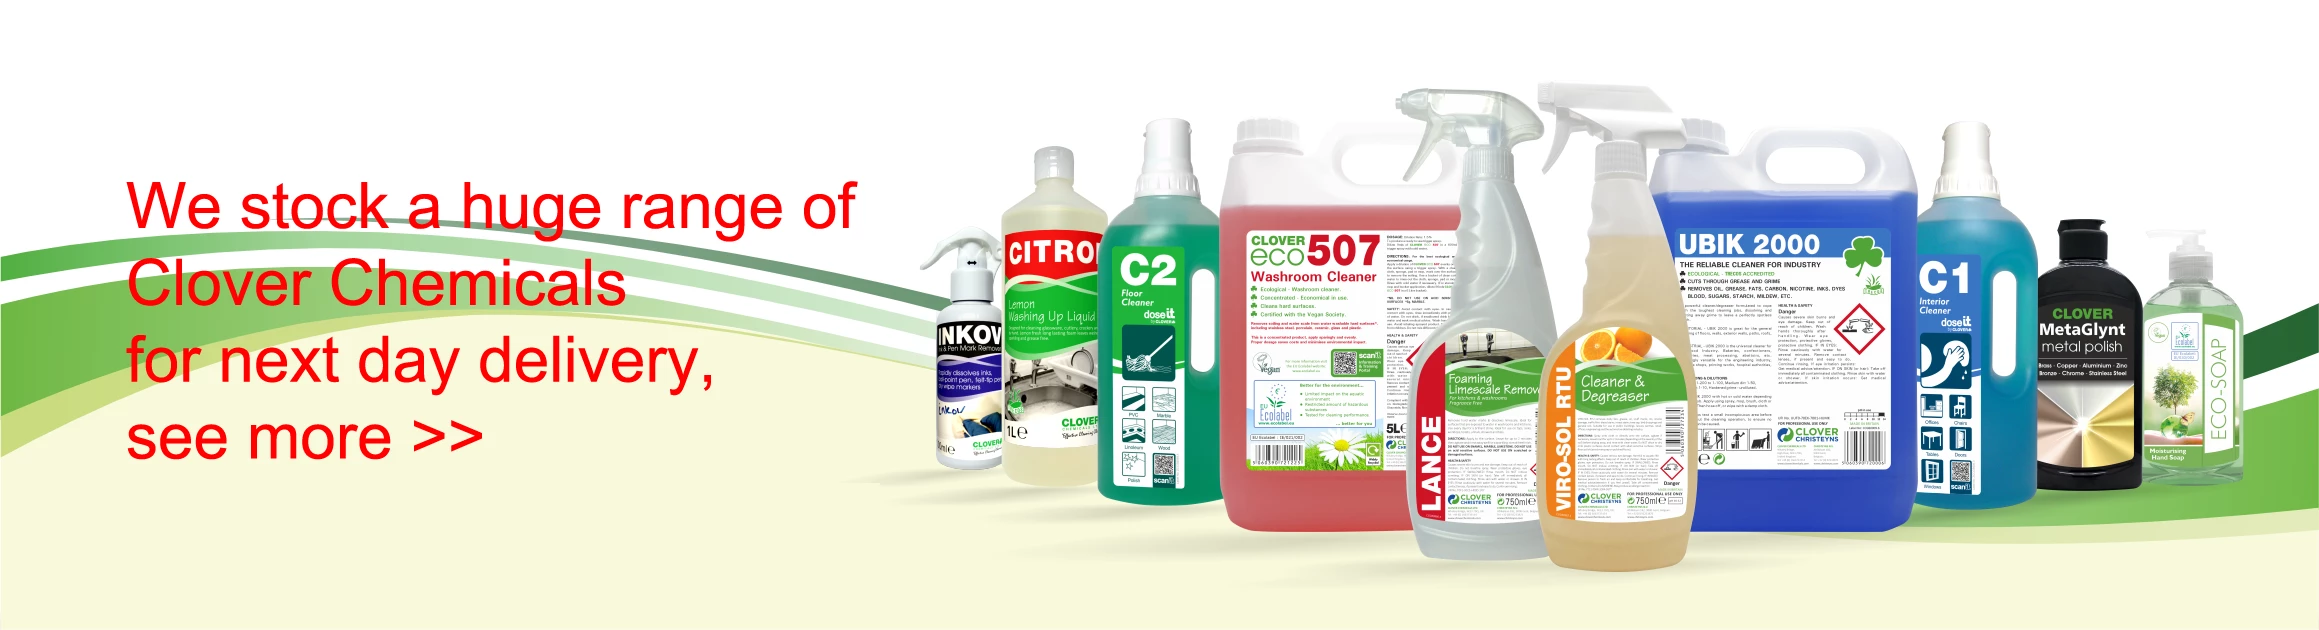 Clover Chemicals Cleaning Products